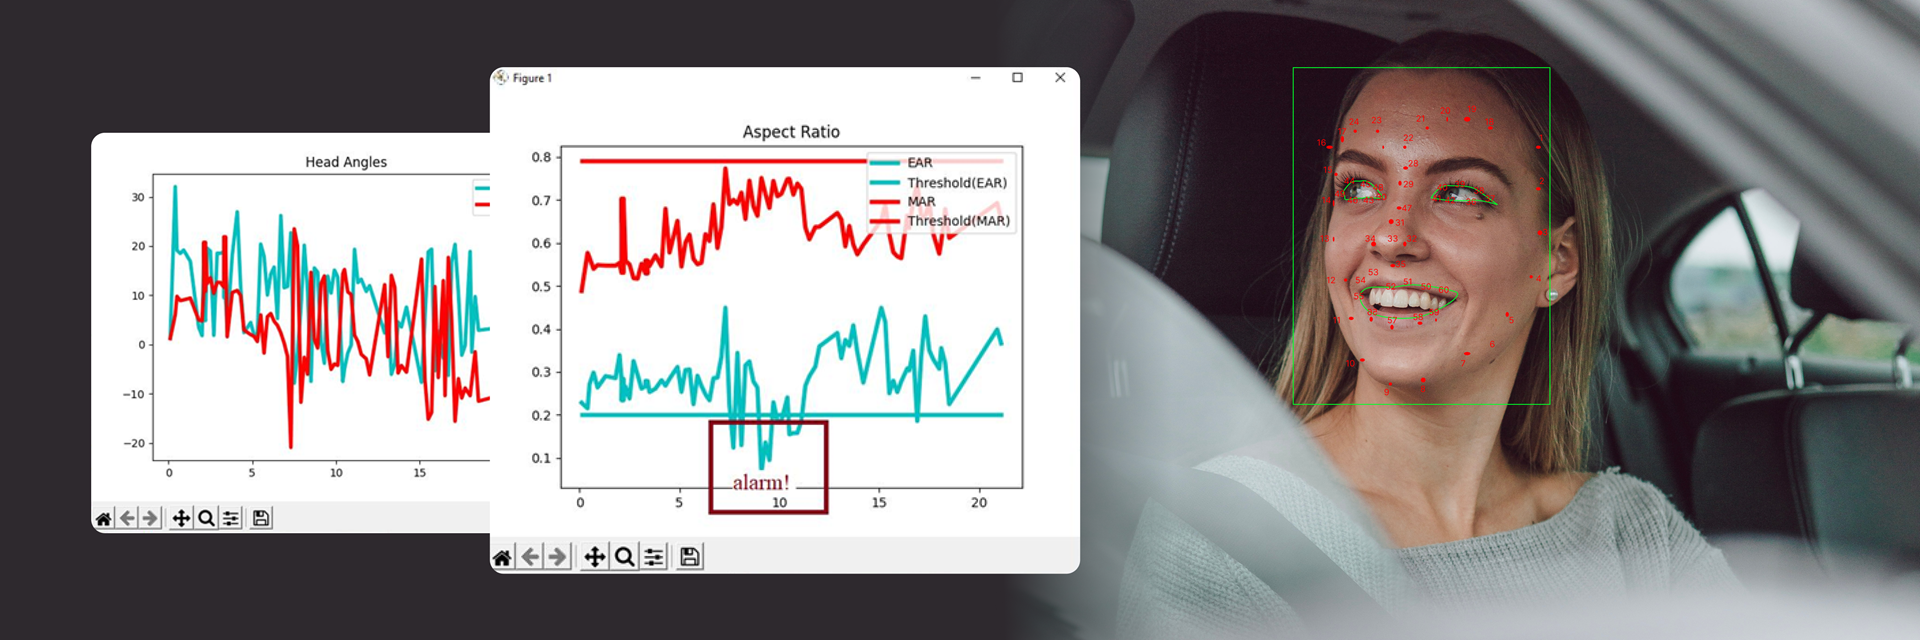 Fatigue monitoring behind the wheel: smart solution for driving safety